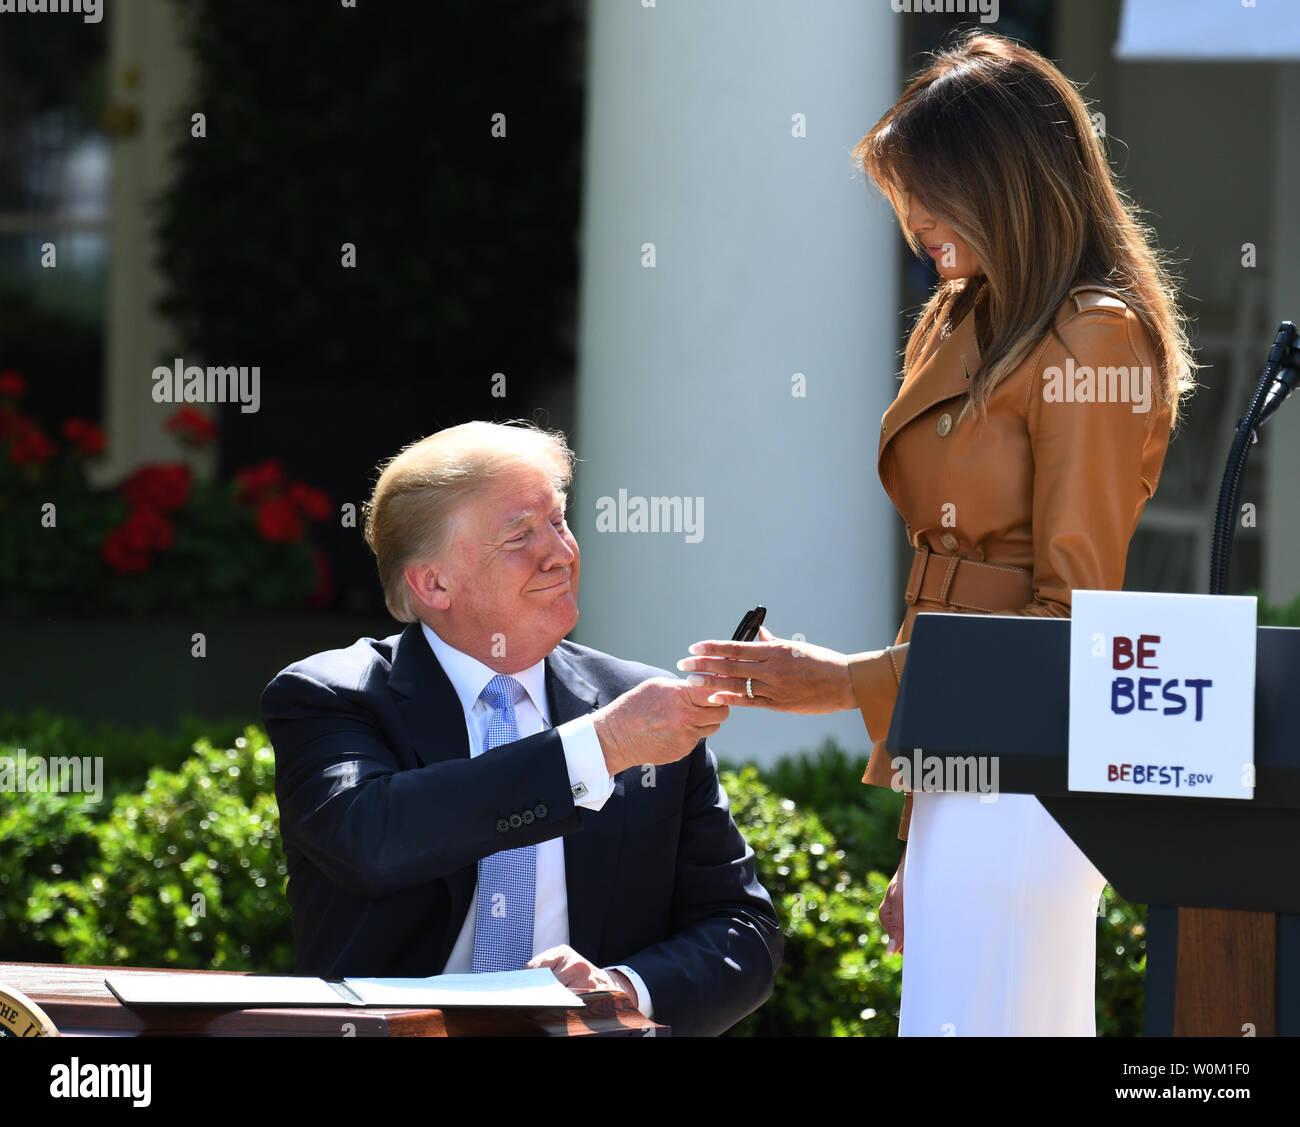 First Lady Melania Trump smiles as she receives a pen by  U.S. President Donald Trump after he signed a  proclamation for 'National Be Best Day' after Melania announced her 'Be Best' initiative in the Rose Garden of the White House in Washington, DC on May 7, 2018.  The 'Be Best' program will focus on fighting opioid abuse, positivity on social media, and well-being.       Photo by Pat Benic/UPI Stock Photo